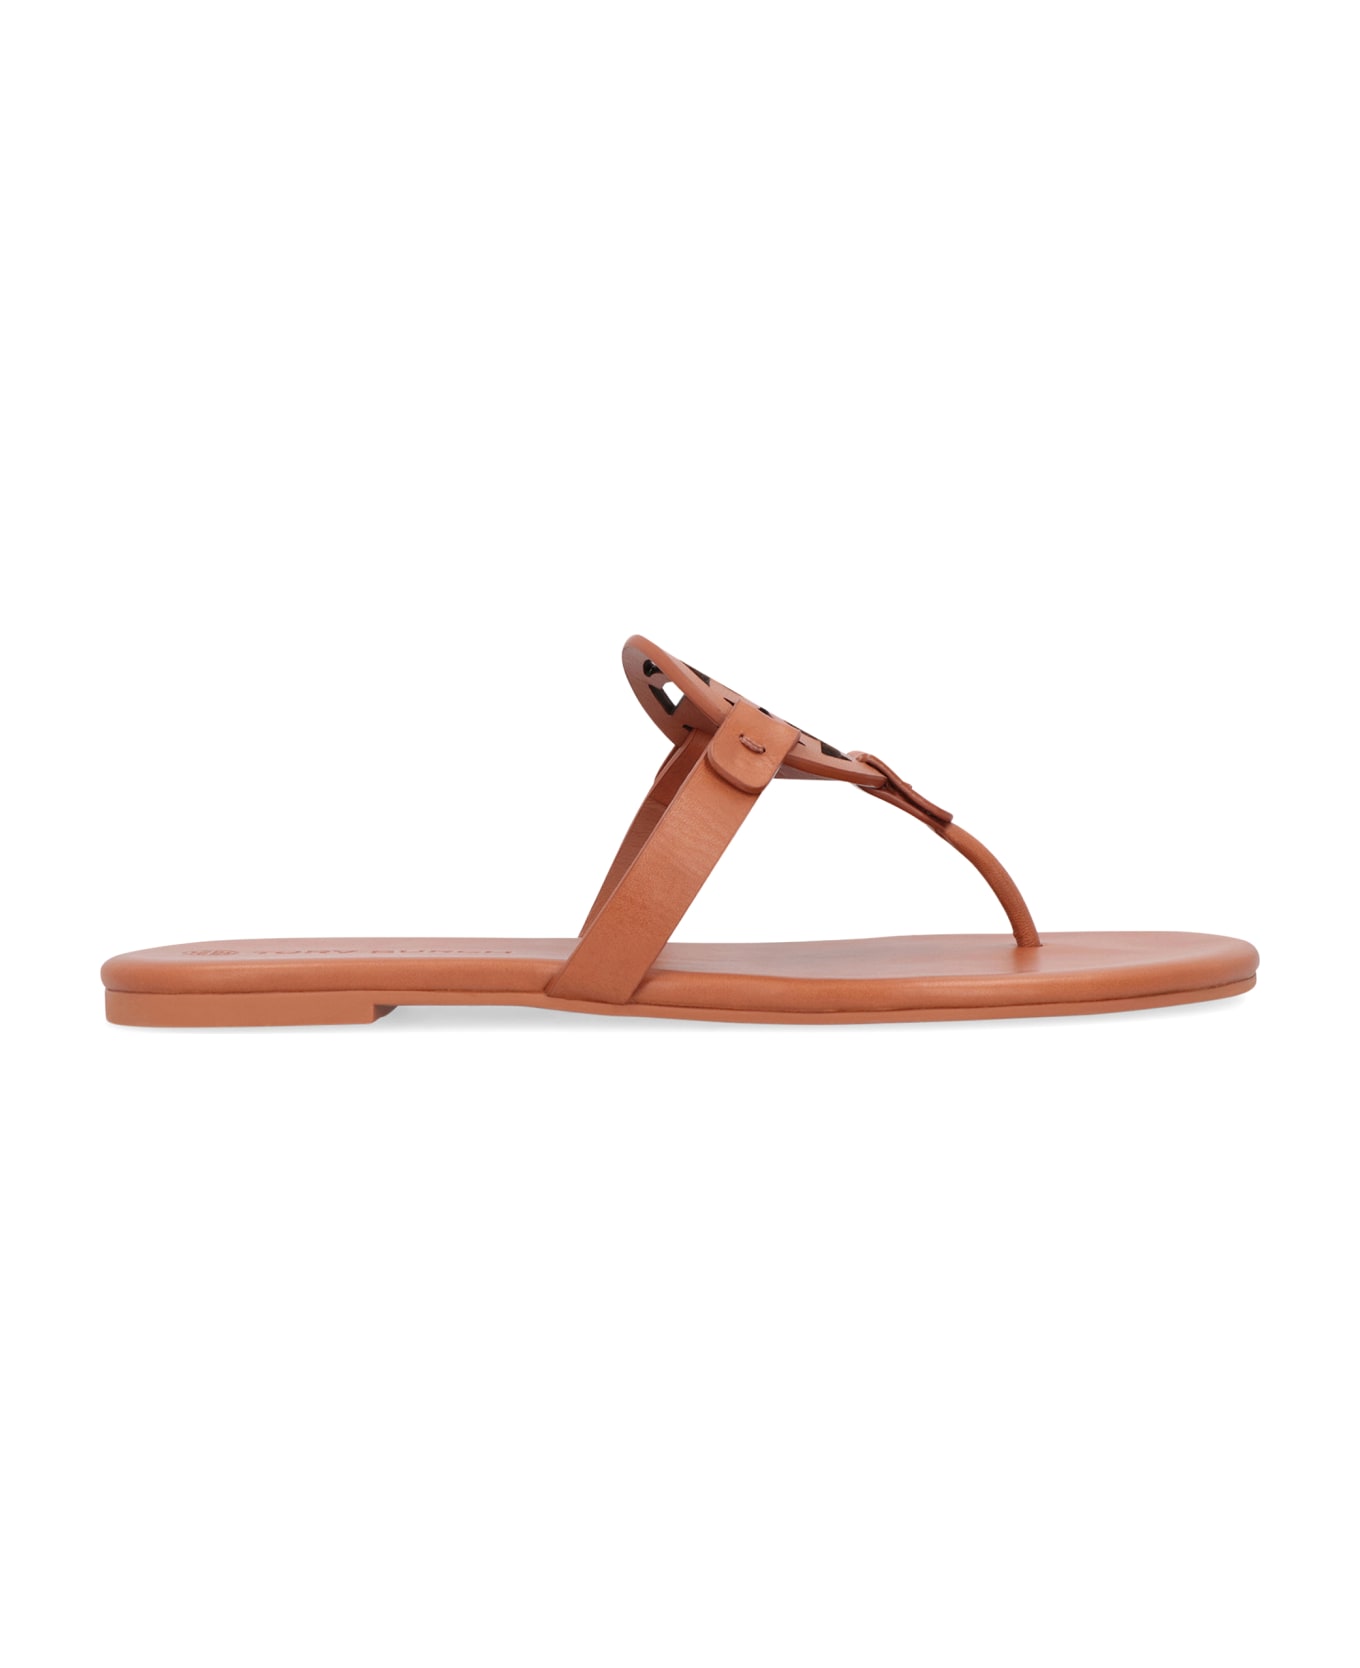 Tory Burch Miller Leather Flat Sandals - Saddle Brown